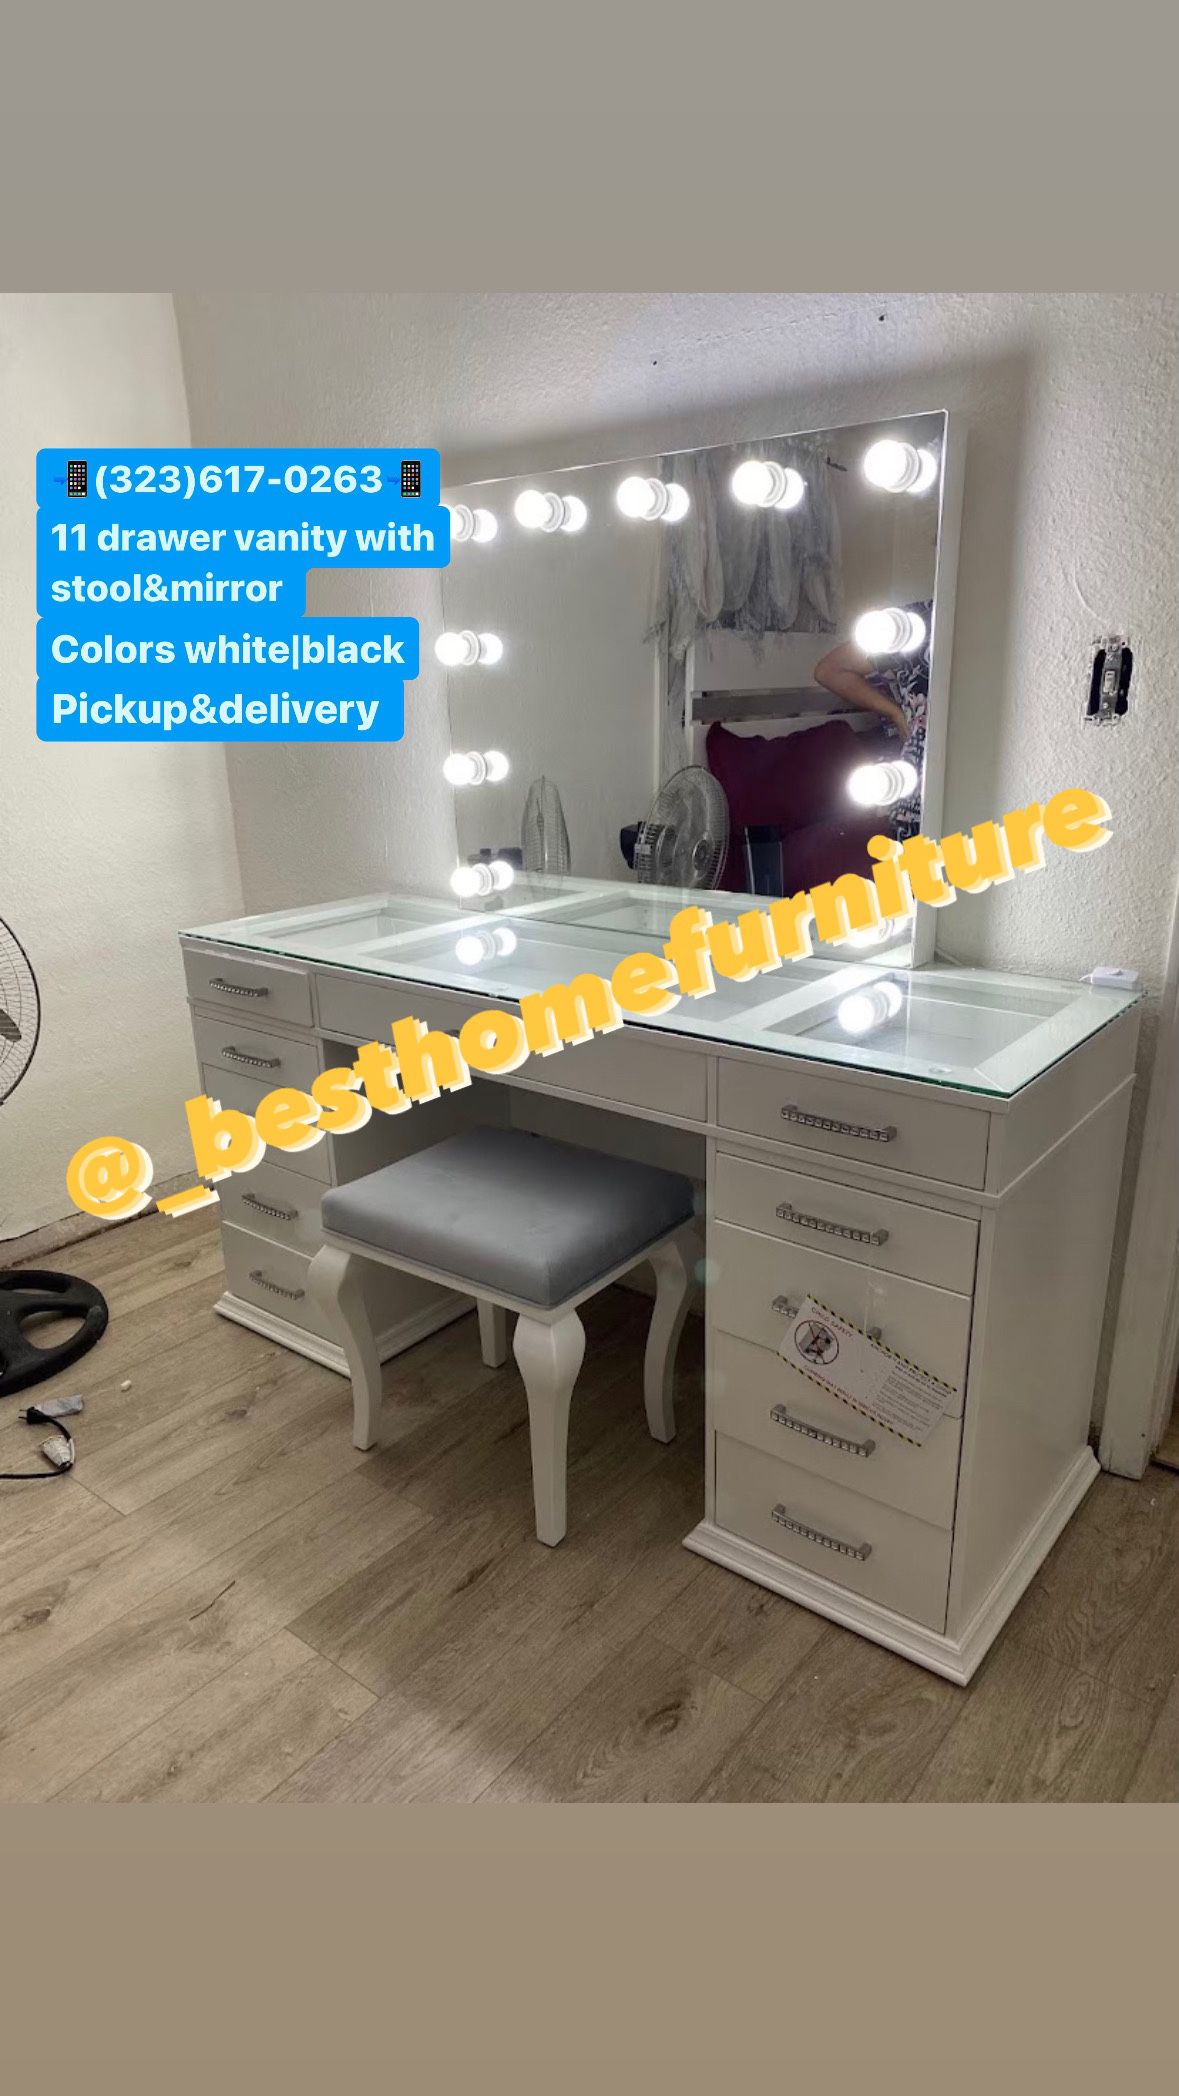 11 Drawer Vanity With Stool And Mirror 